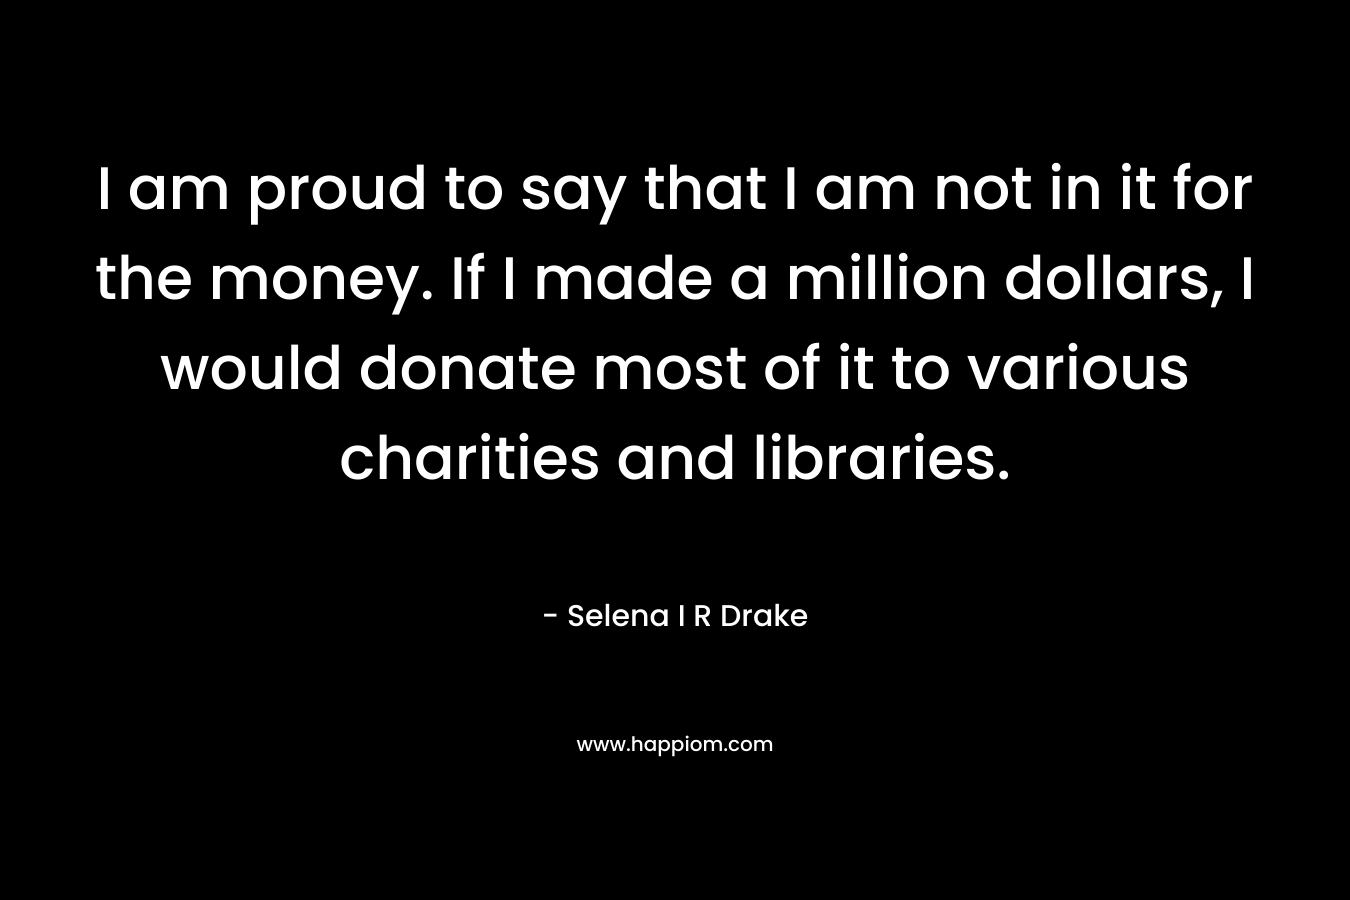 I am proud to say that I am not in it for the money. If I made a million dollars, I would donate most of it to various charities and libraries.